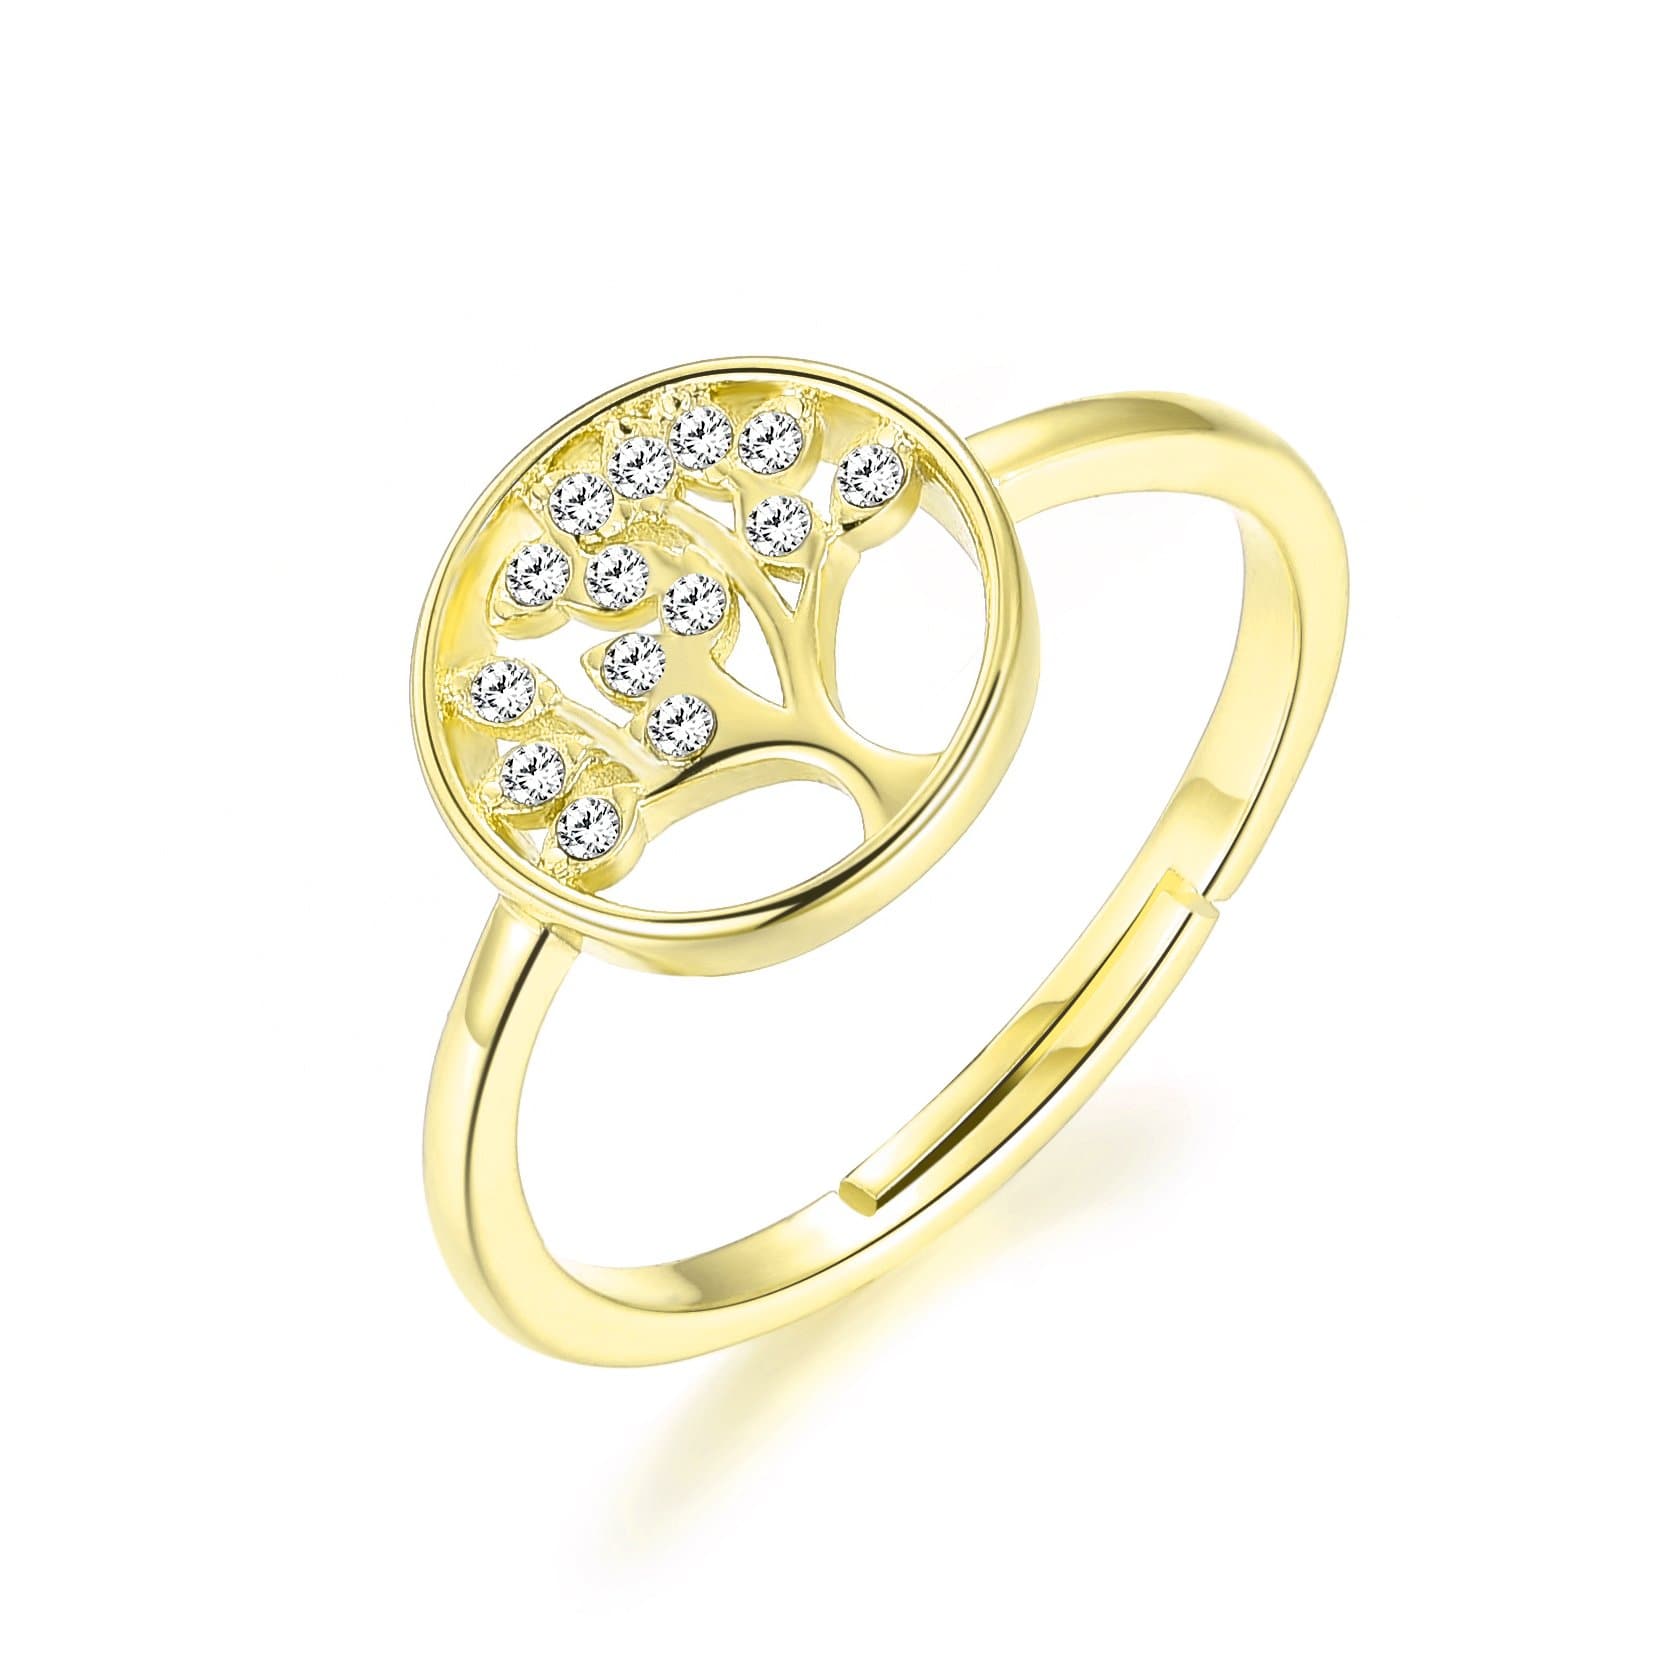 Gold Plated Adjustable Tree of Life Ring Created with Zircondia® Crystals by Philip Jones Jewellery